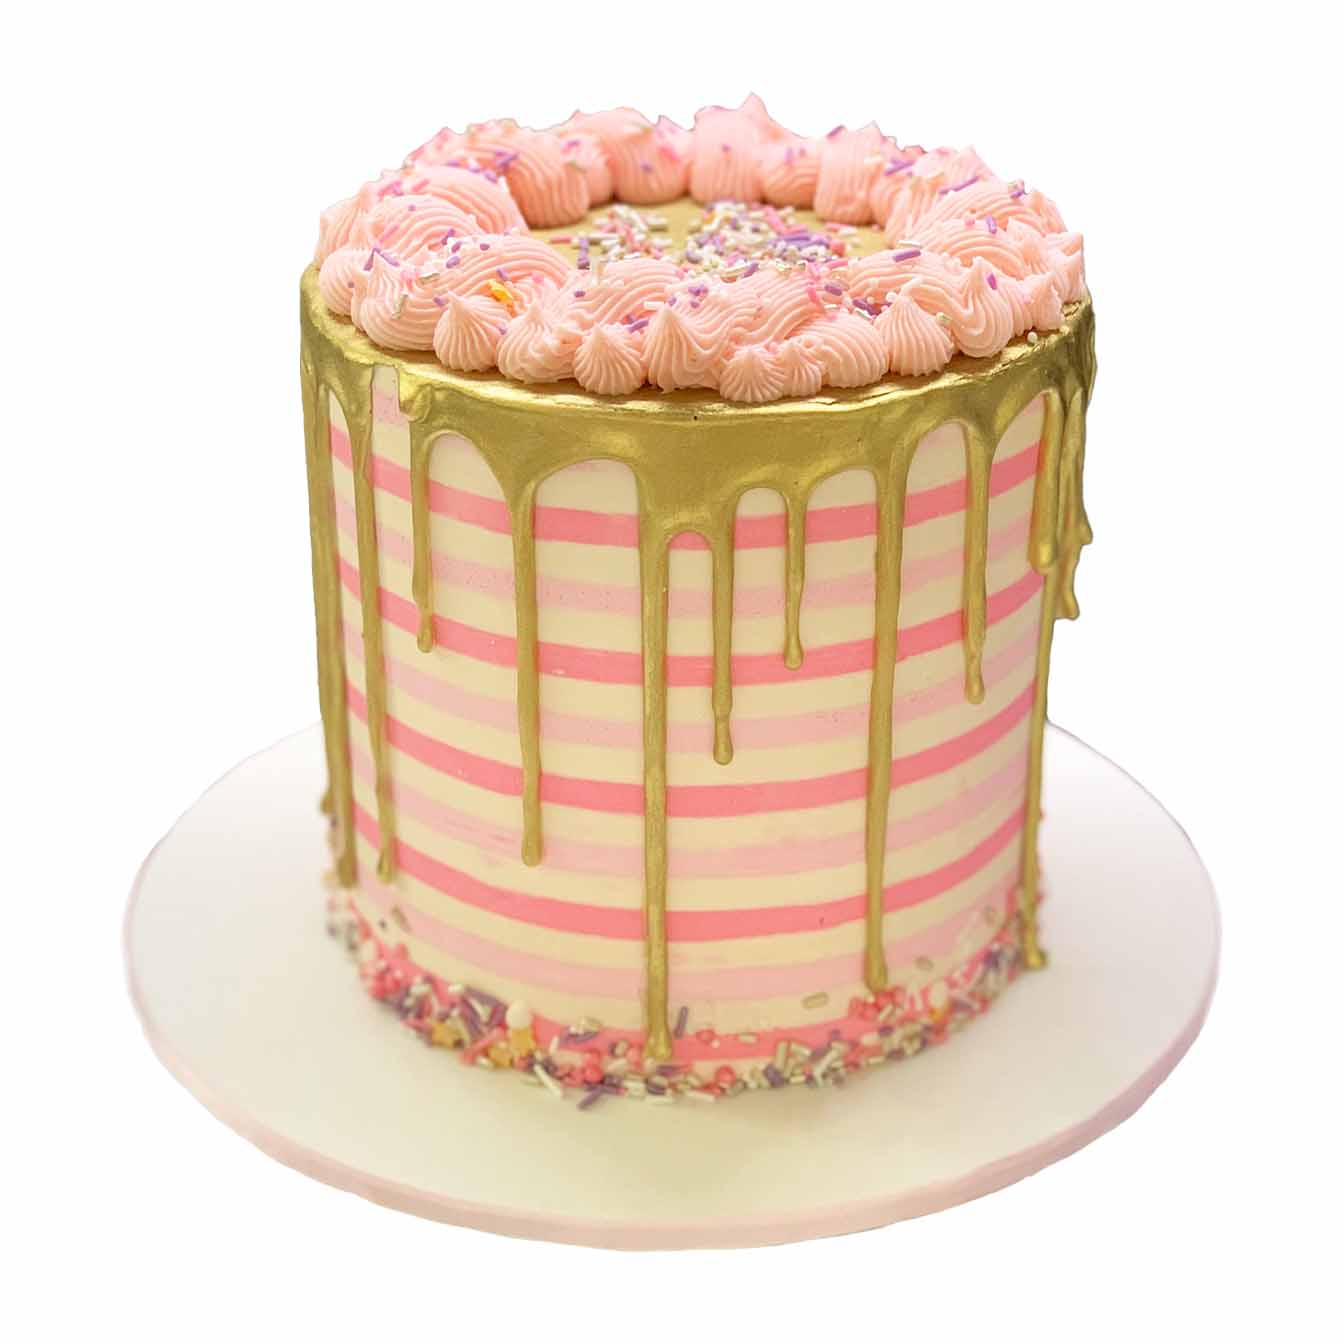 Pink and Gold Celebration Cake - A charming pink and white striped cake with a luxurious gold drip, sprinkles, and pink piping, a perfect centrepiece for chic and celebratory occasions.